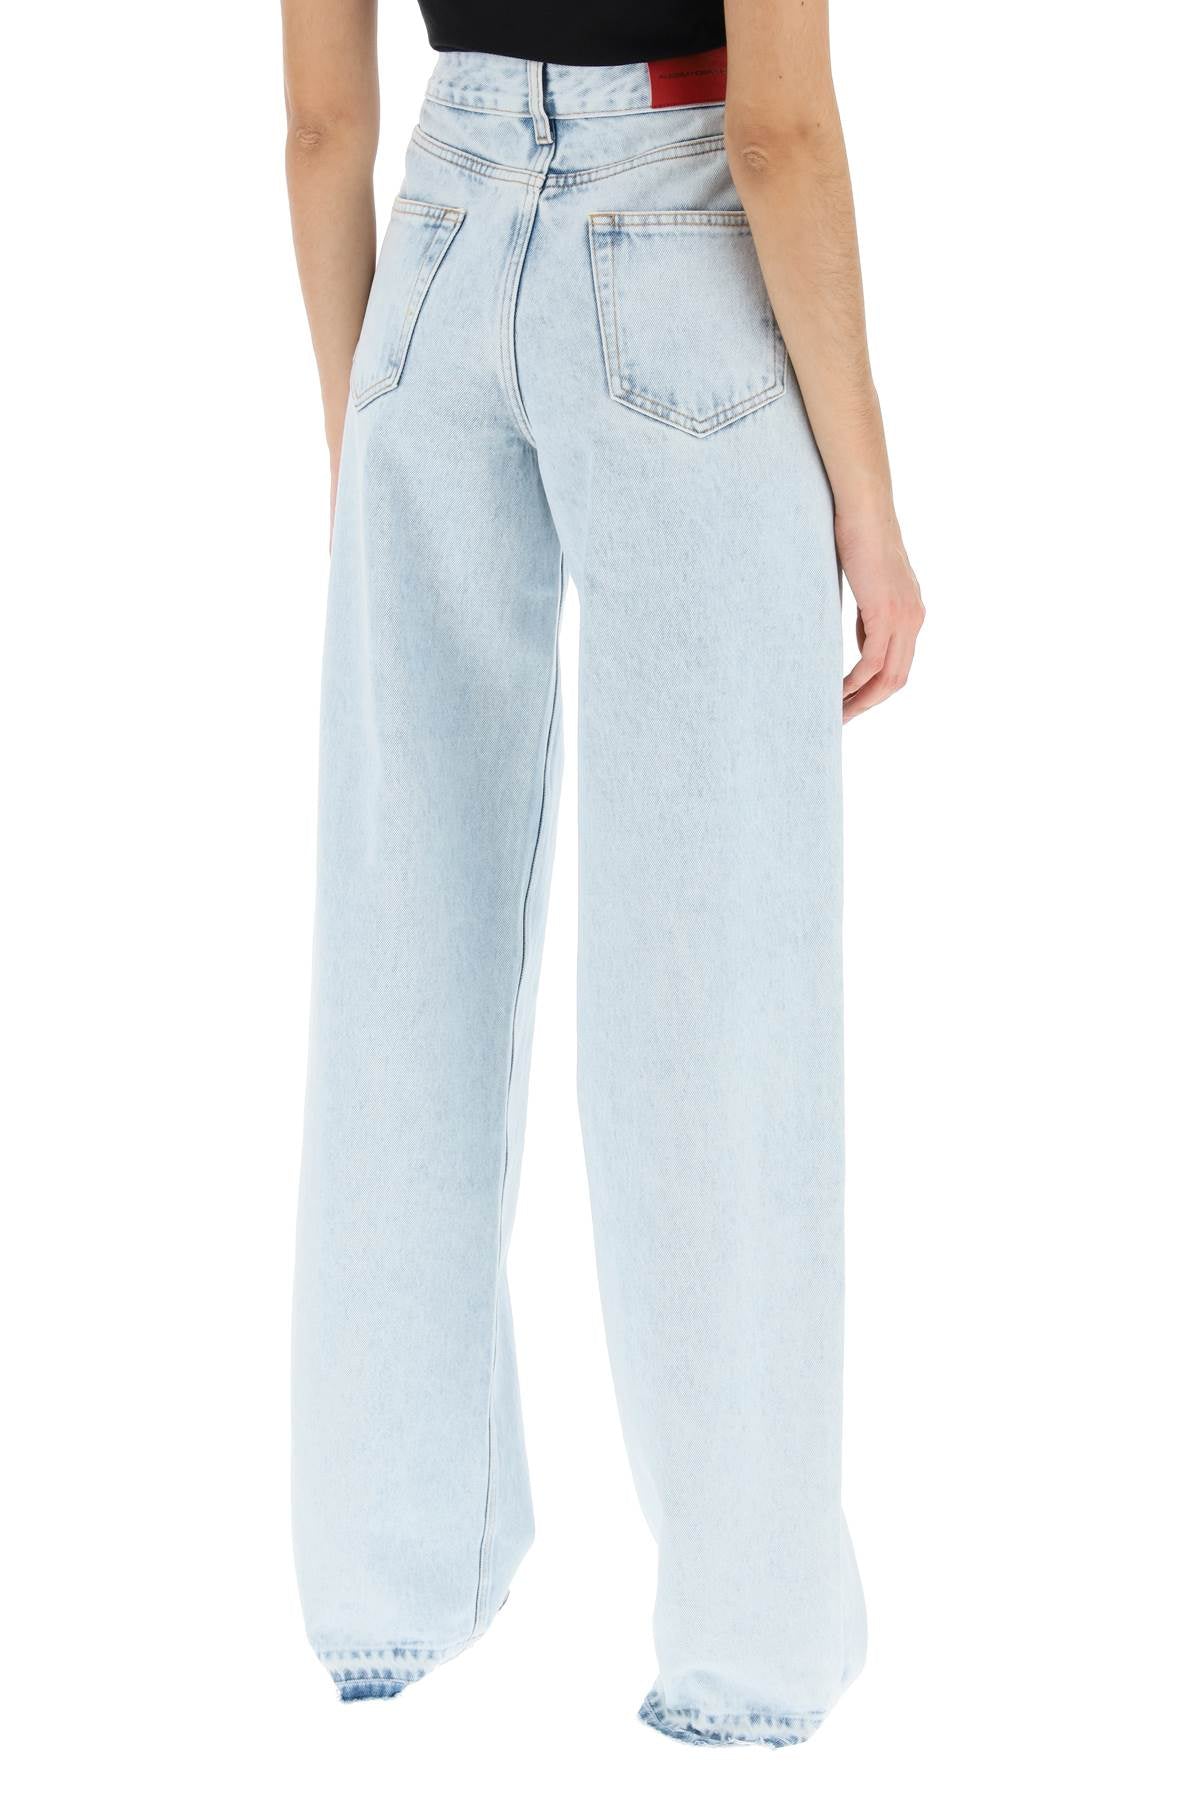 Alessandra Rich Jeans With Studs Light Blue